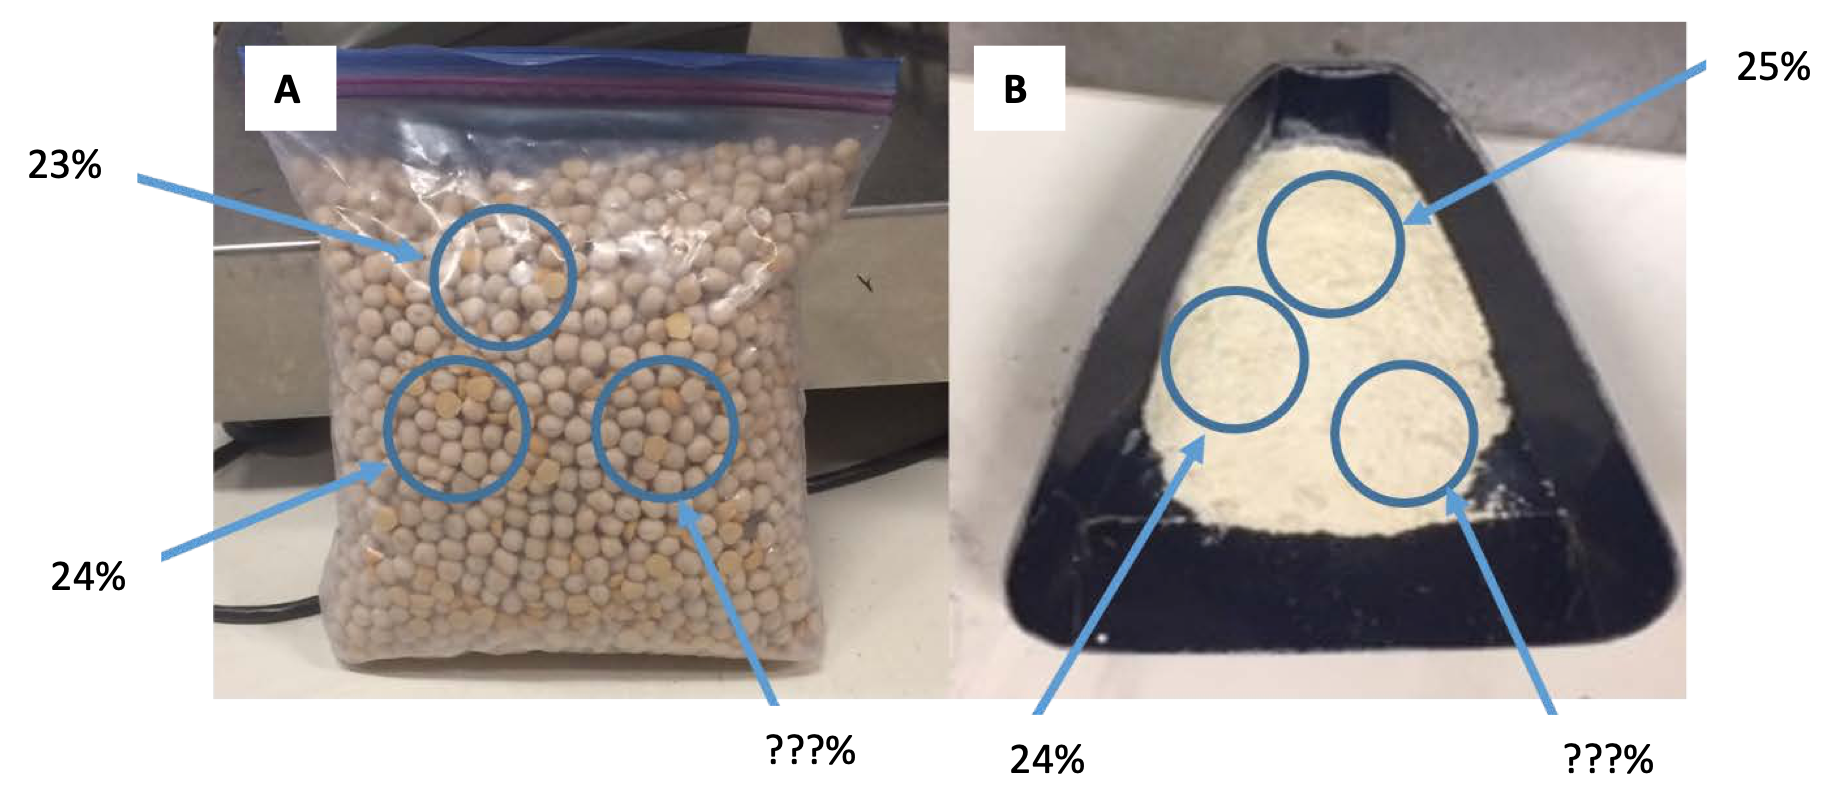 Pea seed and pea powder side-by-side, with differences in protein content among sampling areas highlighted